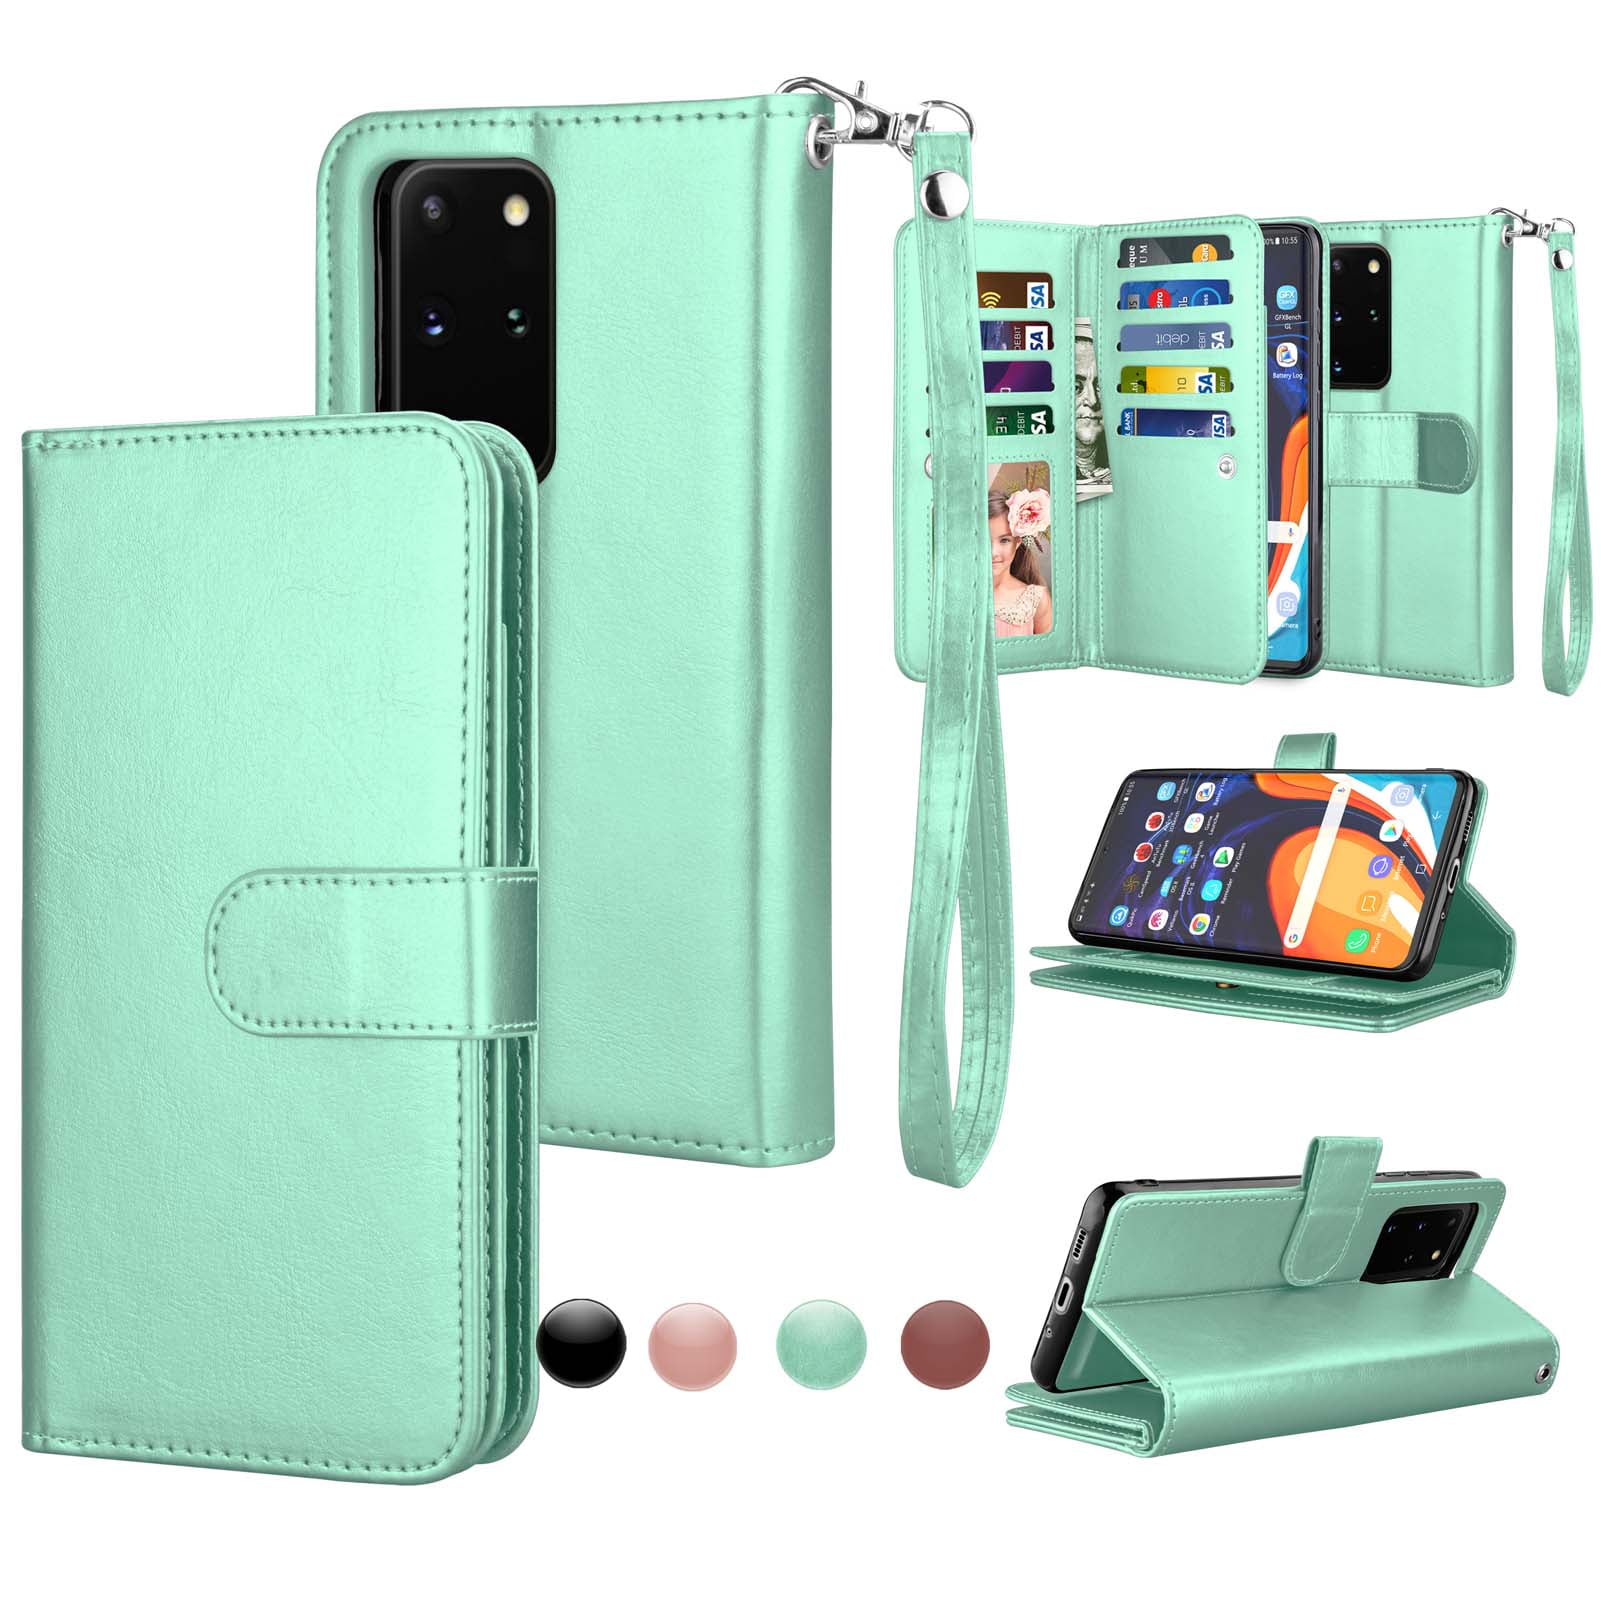 i-Case for Samsung Galaxy A10s Case Flip Wallet Handmade Folio PU leather With TPU Shockproof Inner Shell Card Slot Stand Function Durable Bag Case for Galaxy A10s Unicorn Case Magnetic Closure